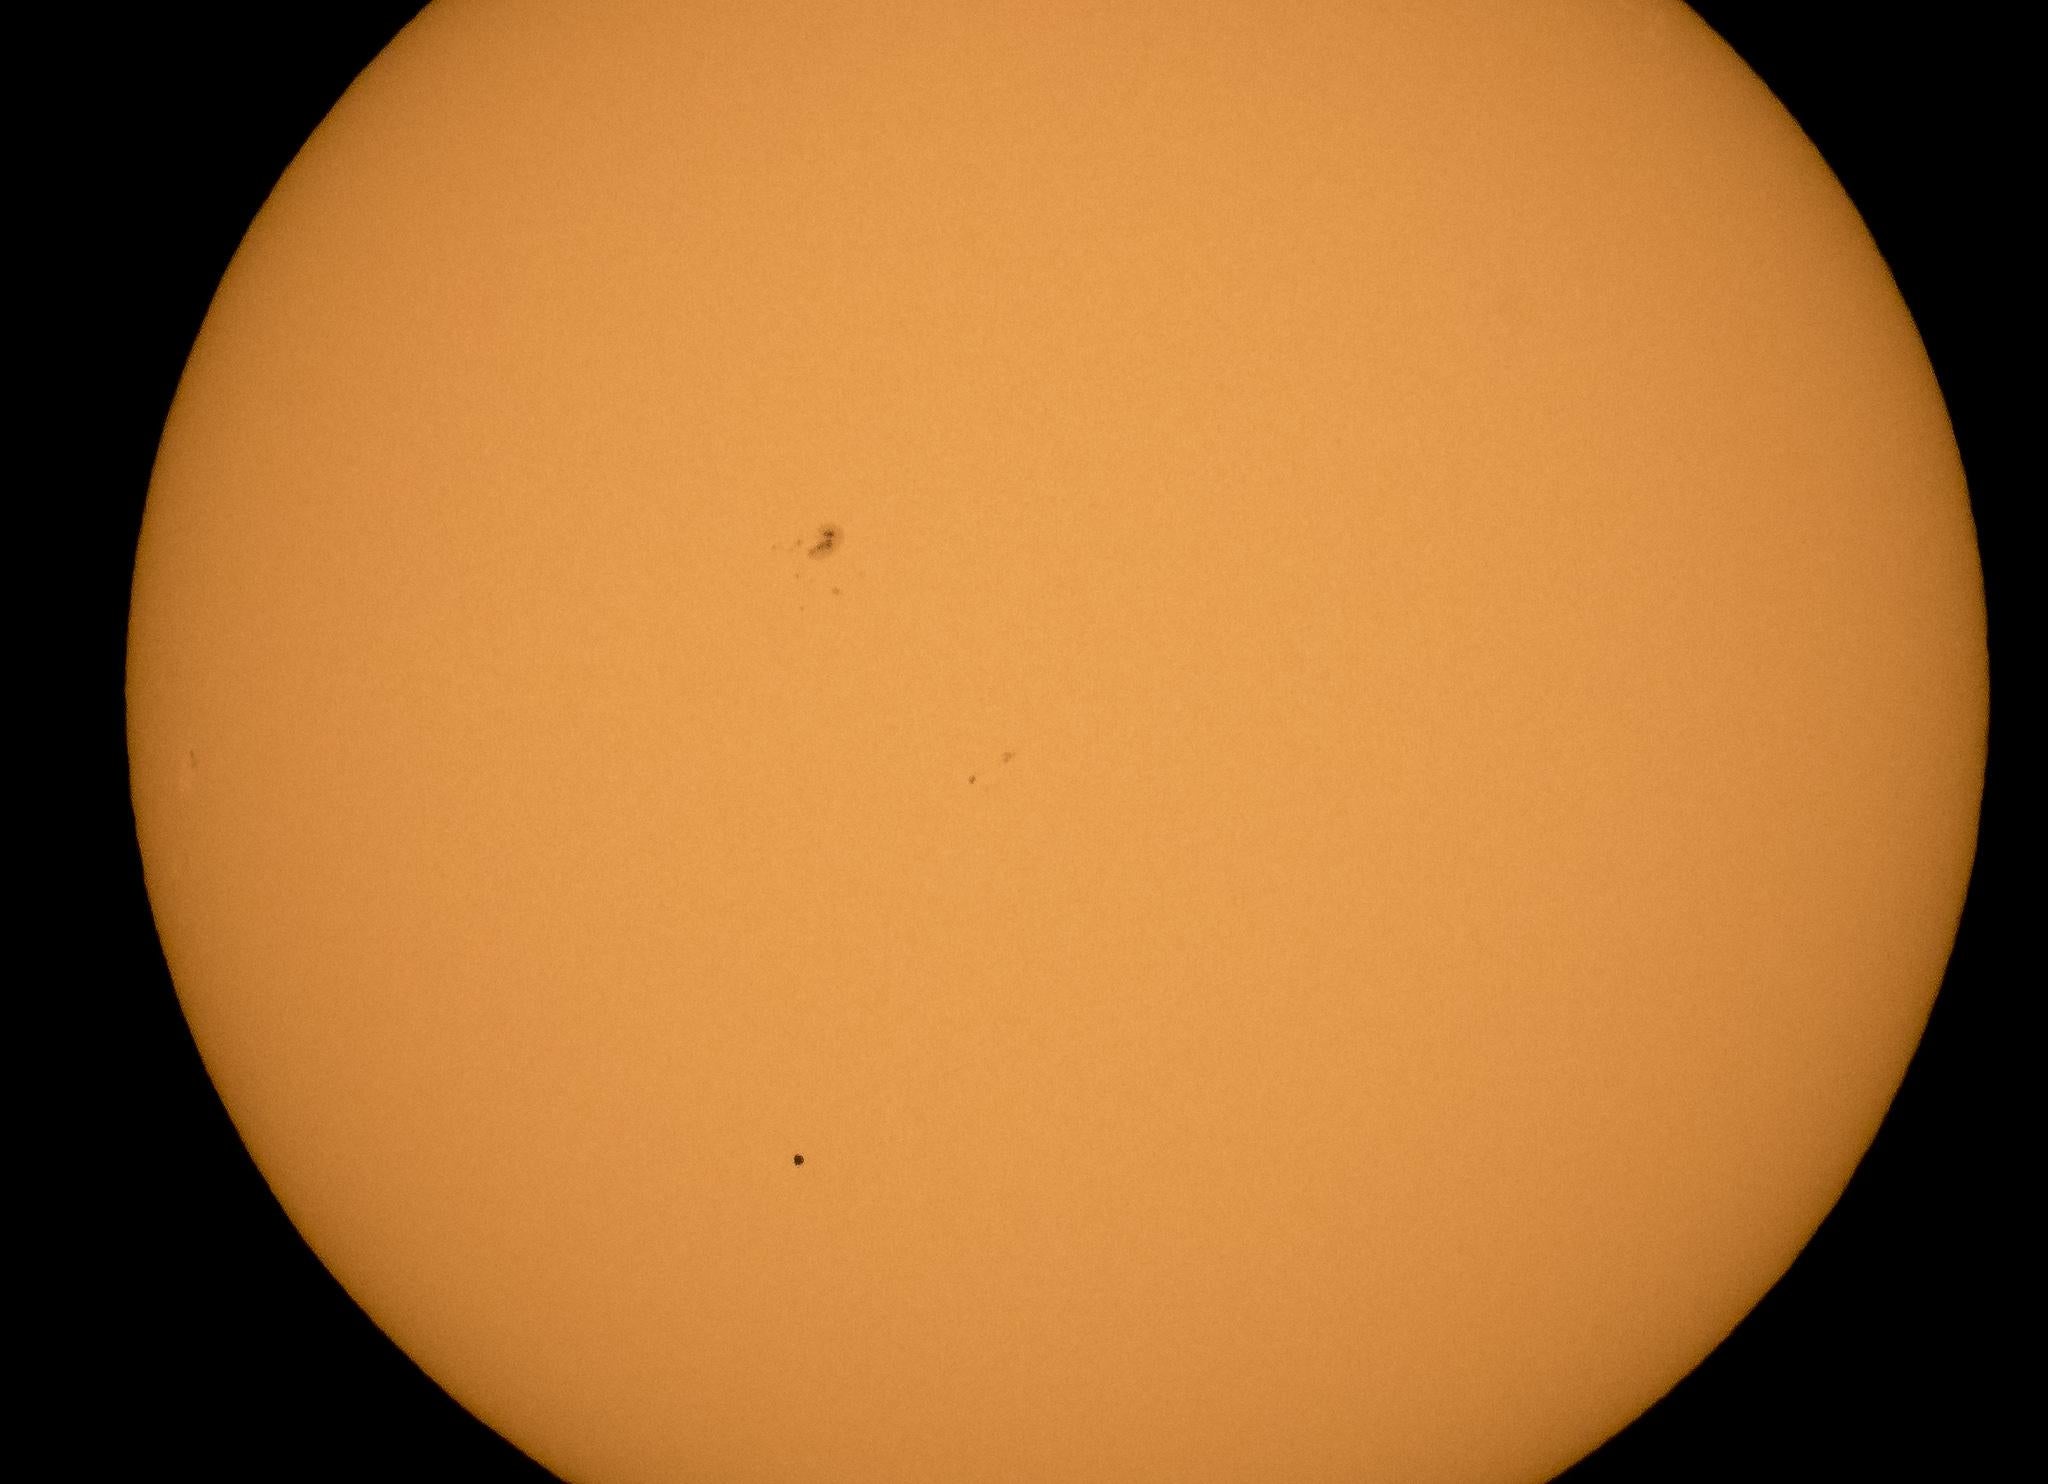 The planet Mercury is seen in silhouette, lower third of image, as it transits across the face of the sun Monday, May 9, 2016, as viewed from Boyertown, Pennsylvania